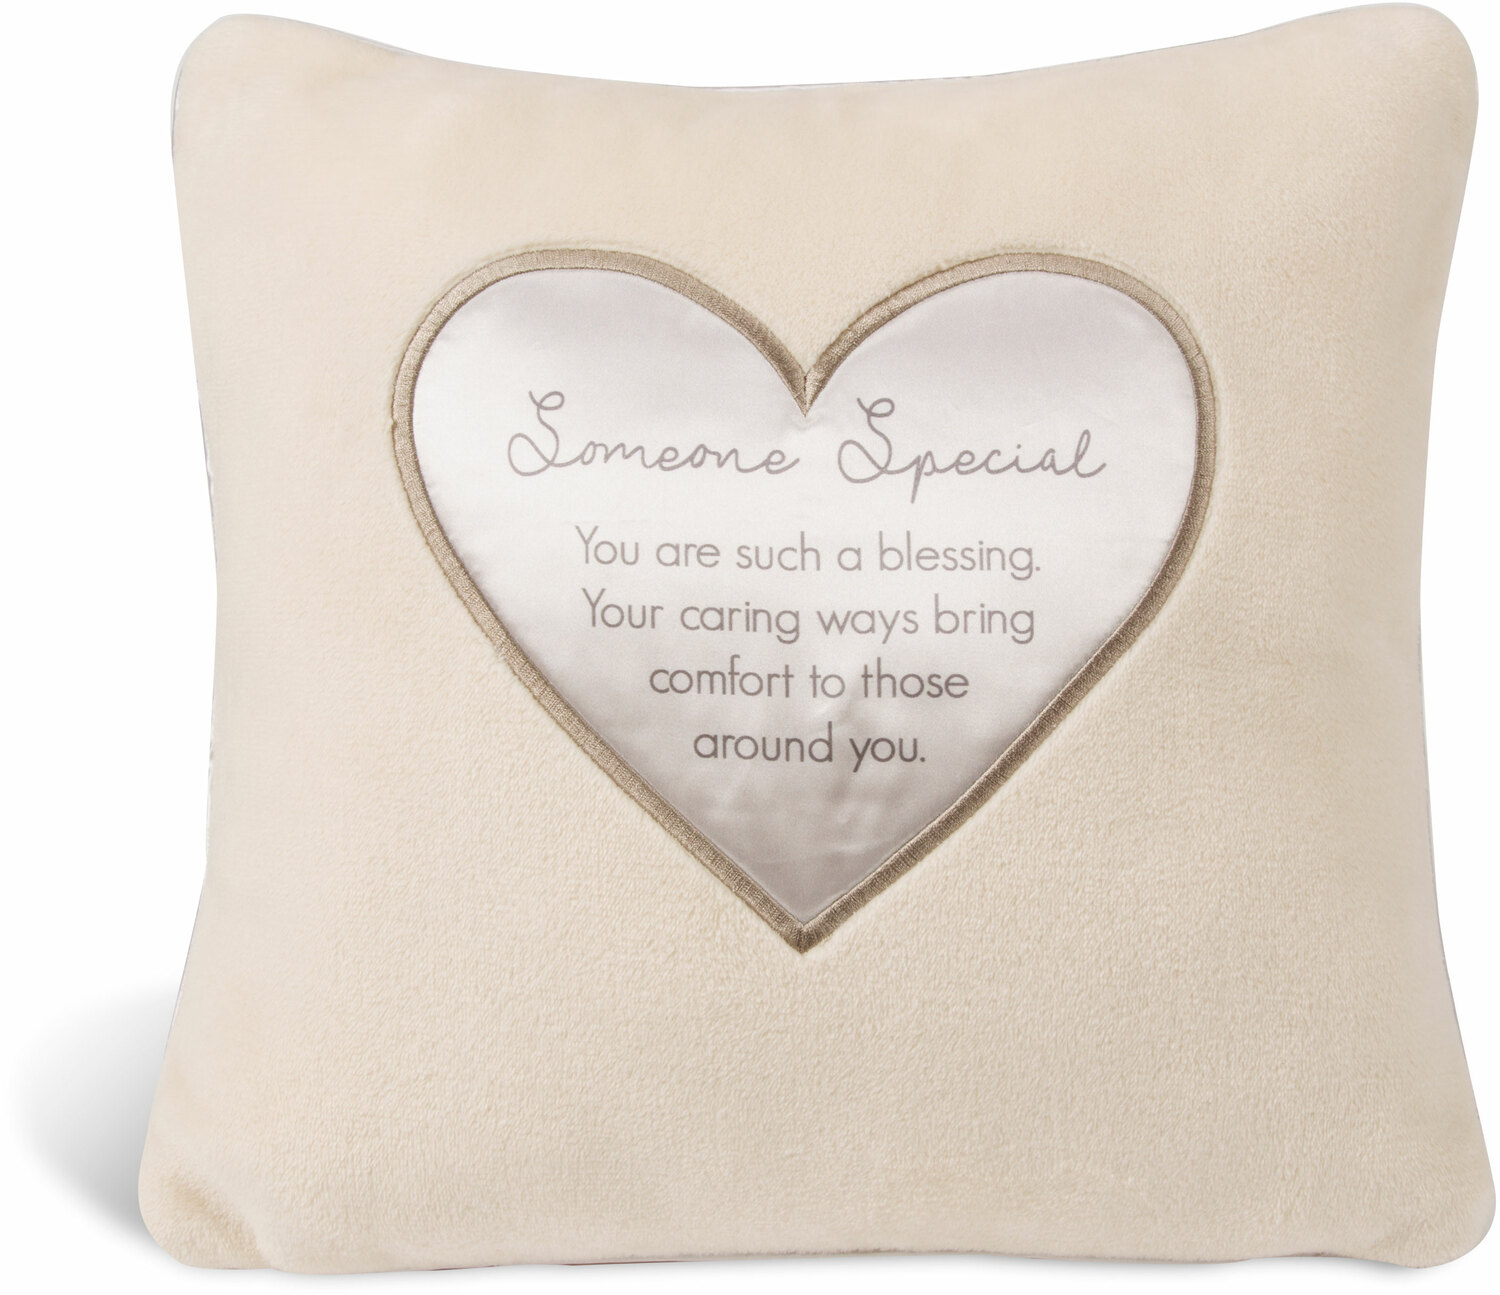 Someone Special by Comfort Blanket - Someone Special - 16" Royal Plush Pillow